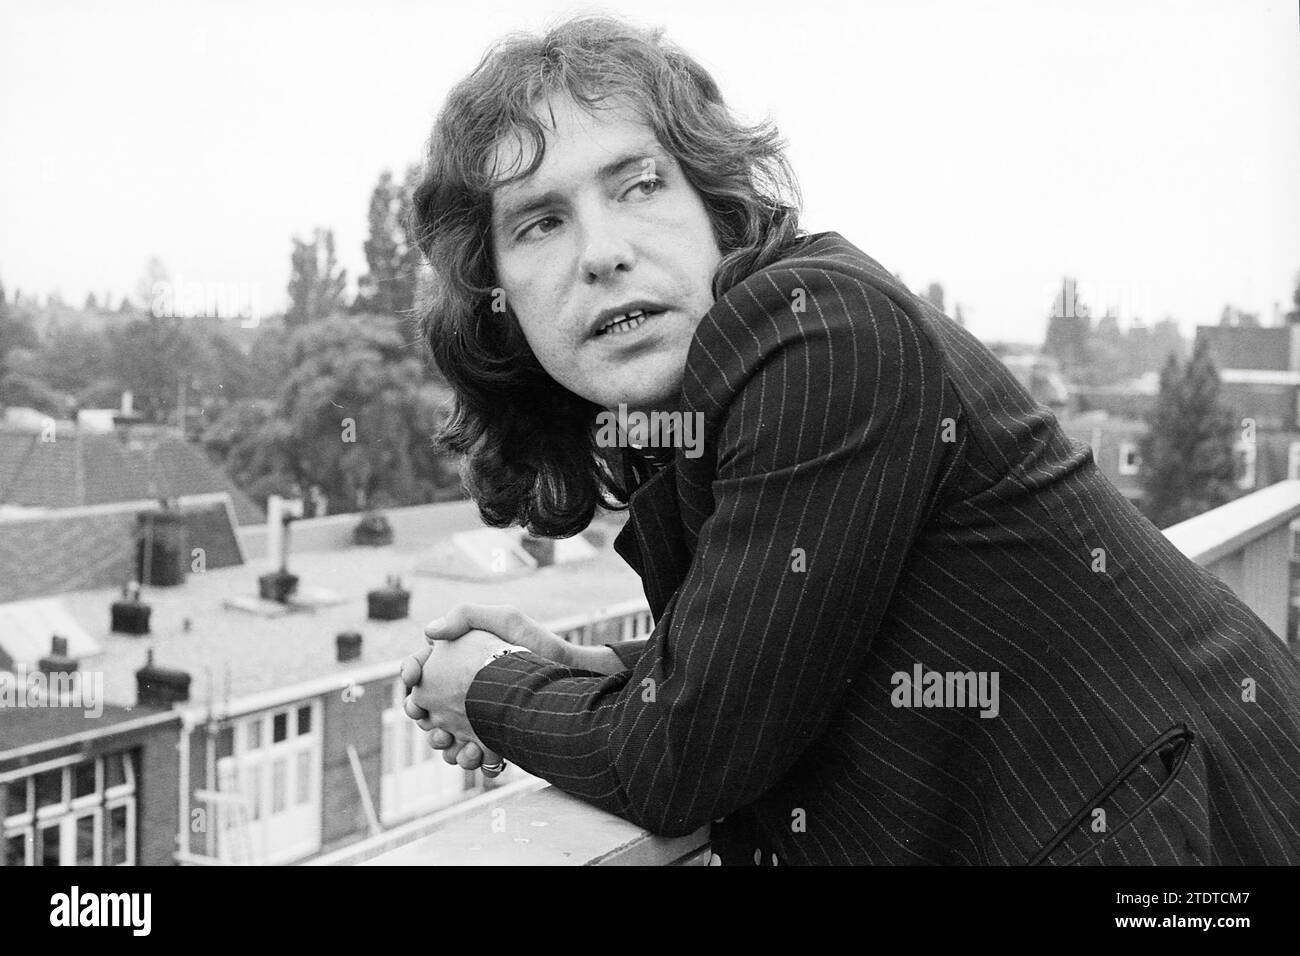 Frankie Miller singer, Personen singing and music, 02-08-1977, Whizgle News from the Past, Tailored for the Future. Explore historical narratives, Dutch The Netherlands agency image with a modern perspective, bridging the gap between yesterday's events and tomorrow's insights. A timeless journey shaping the stories that shape our future Stock Photo